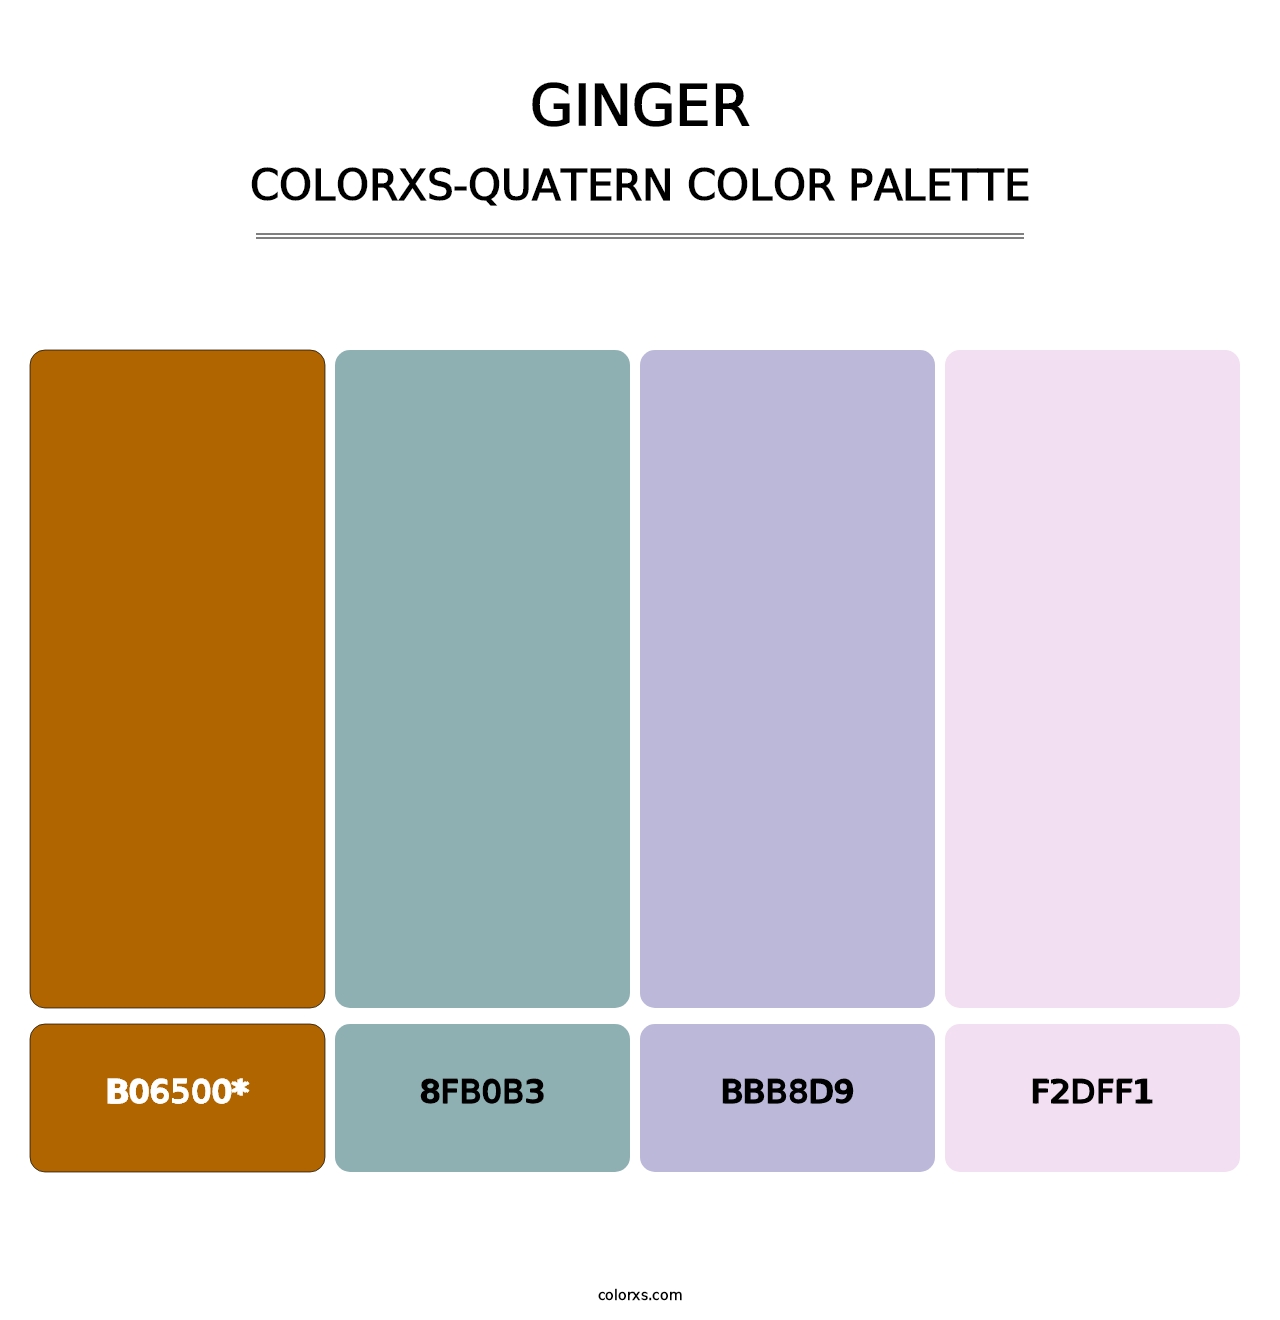 Ginger - Colorxs Quatern Palette